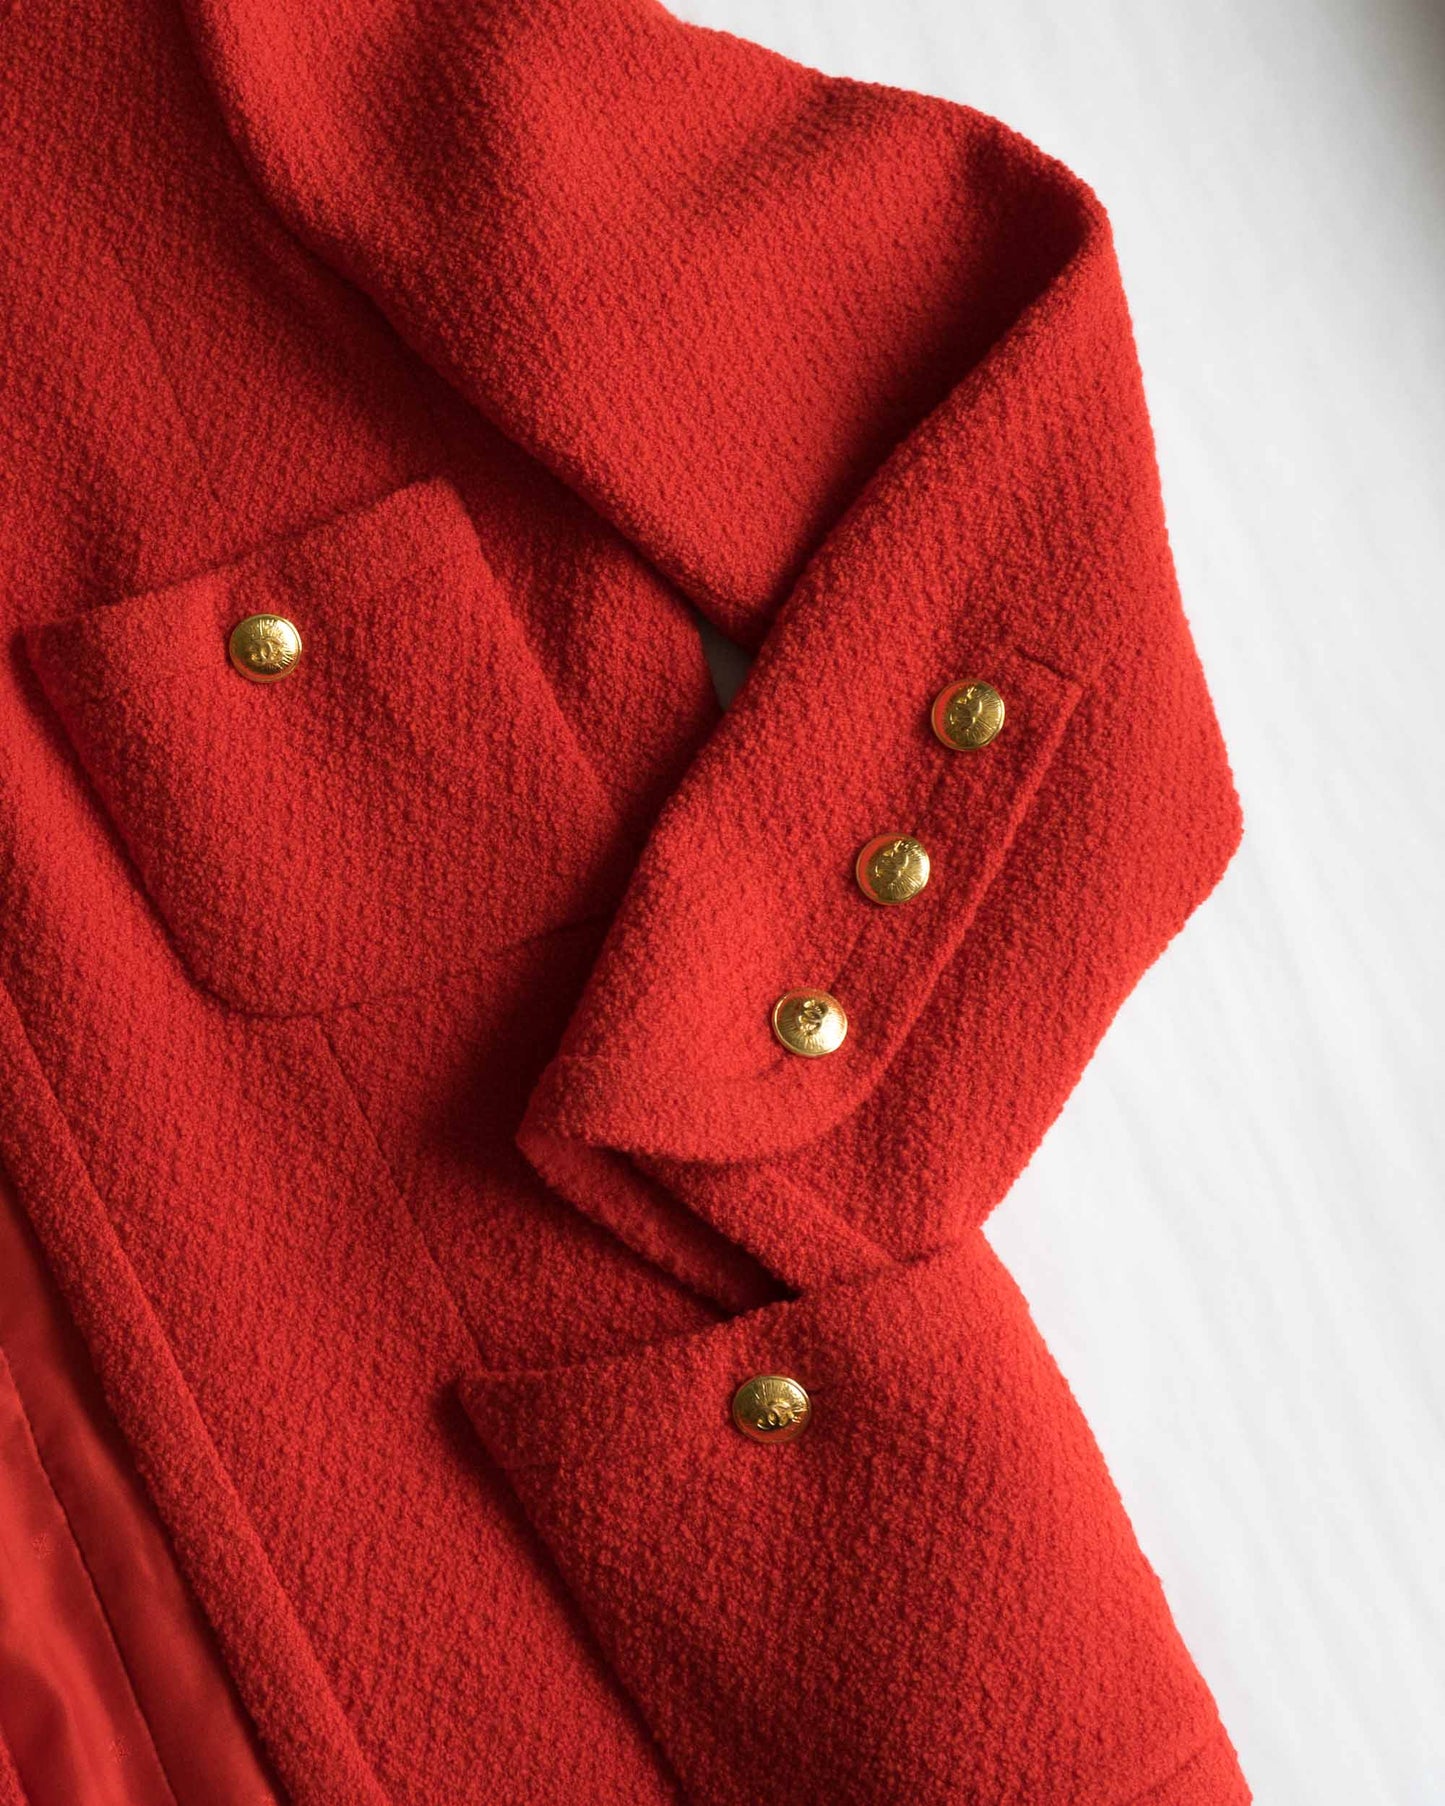 FR38-40 Chanel Spring 1991 Four Pocket Wool Boucle Collarless Jacket in Red